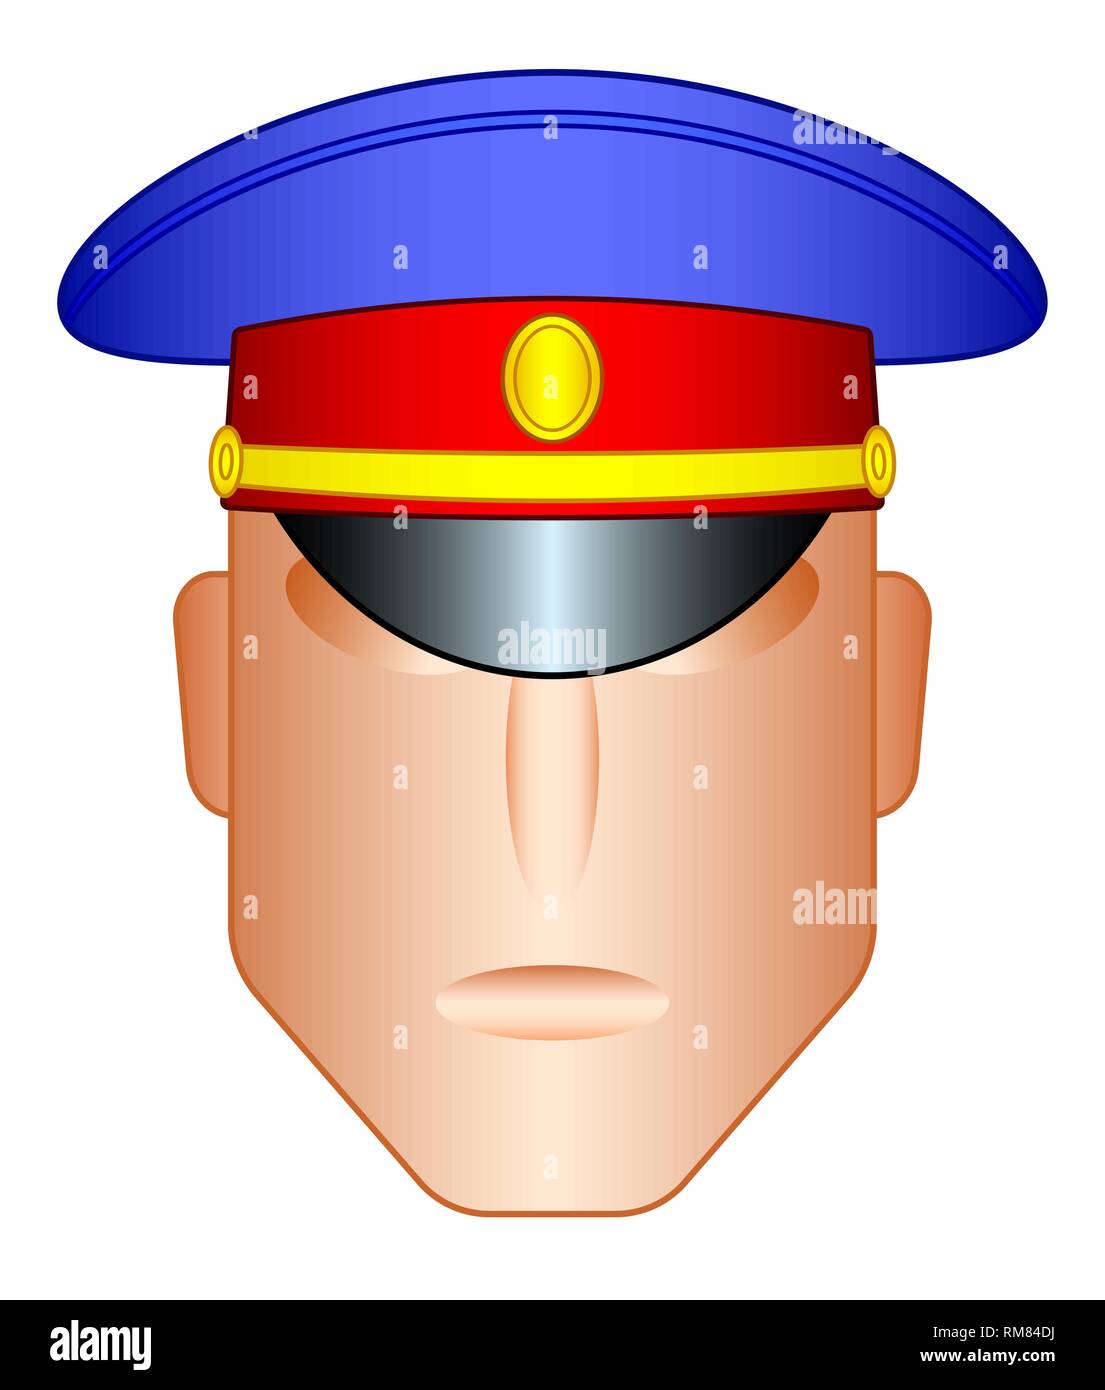 Illustration of the head in a service hat Stock Vector